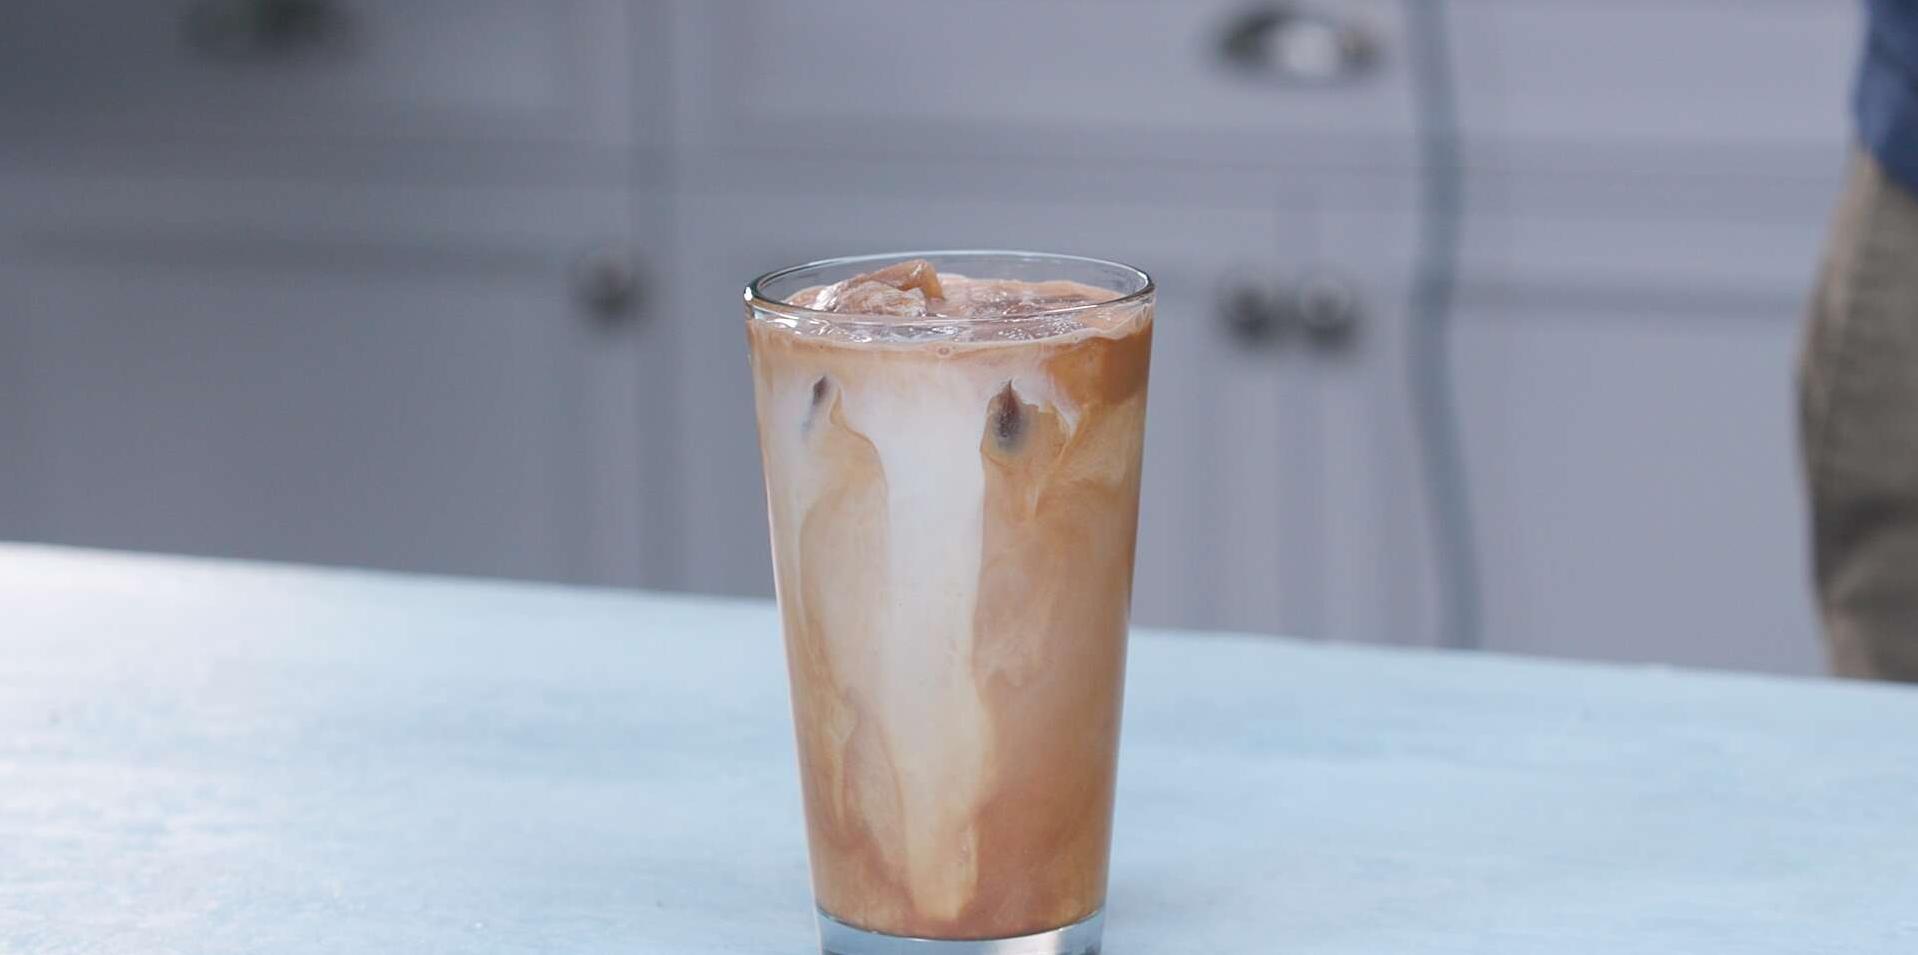  A refreshing iced coffee with a Nutella twist.